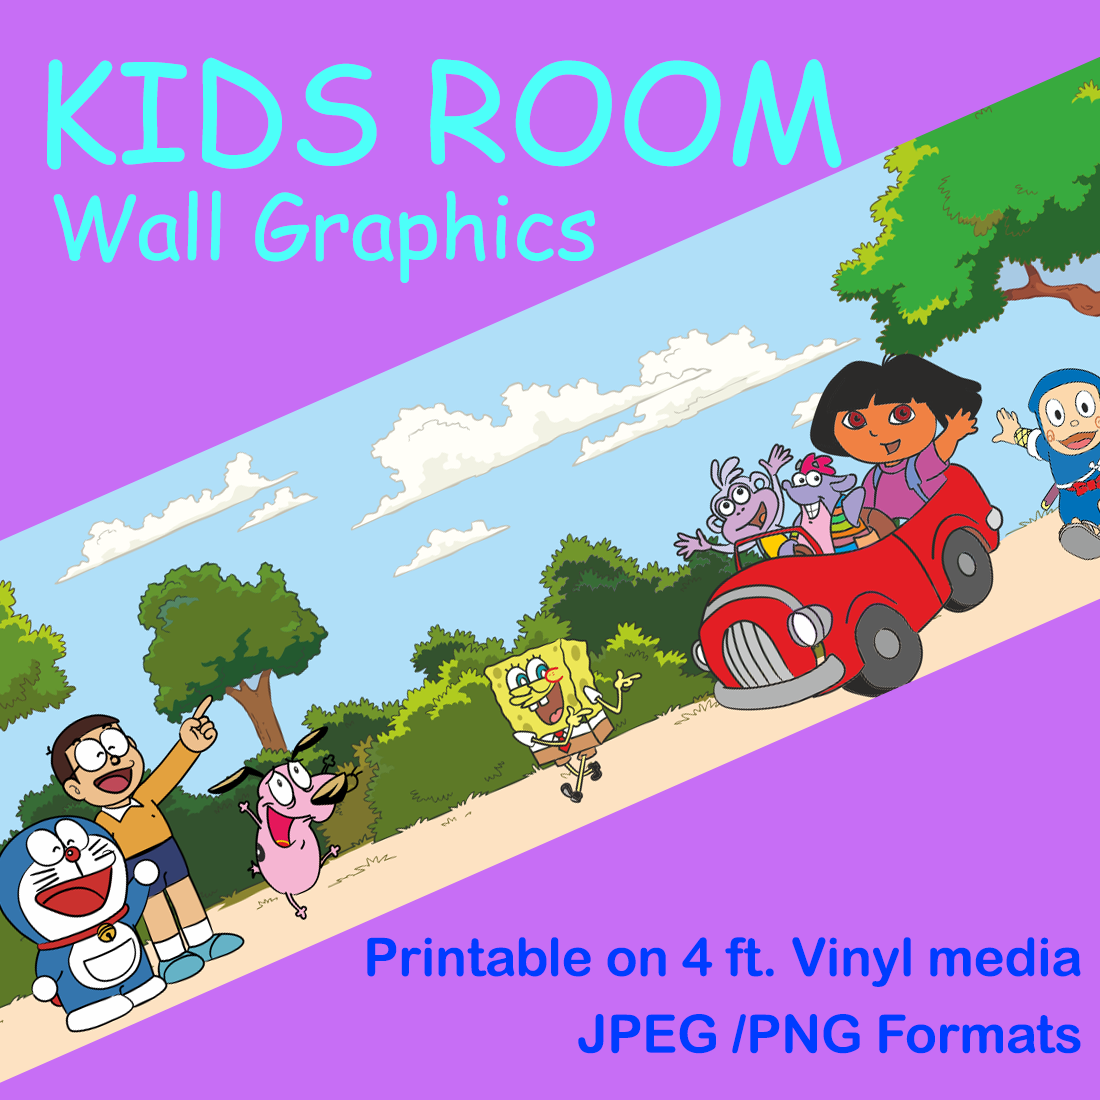 Kids Room Wall Graphics and Stickers cover image.